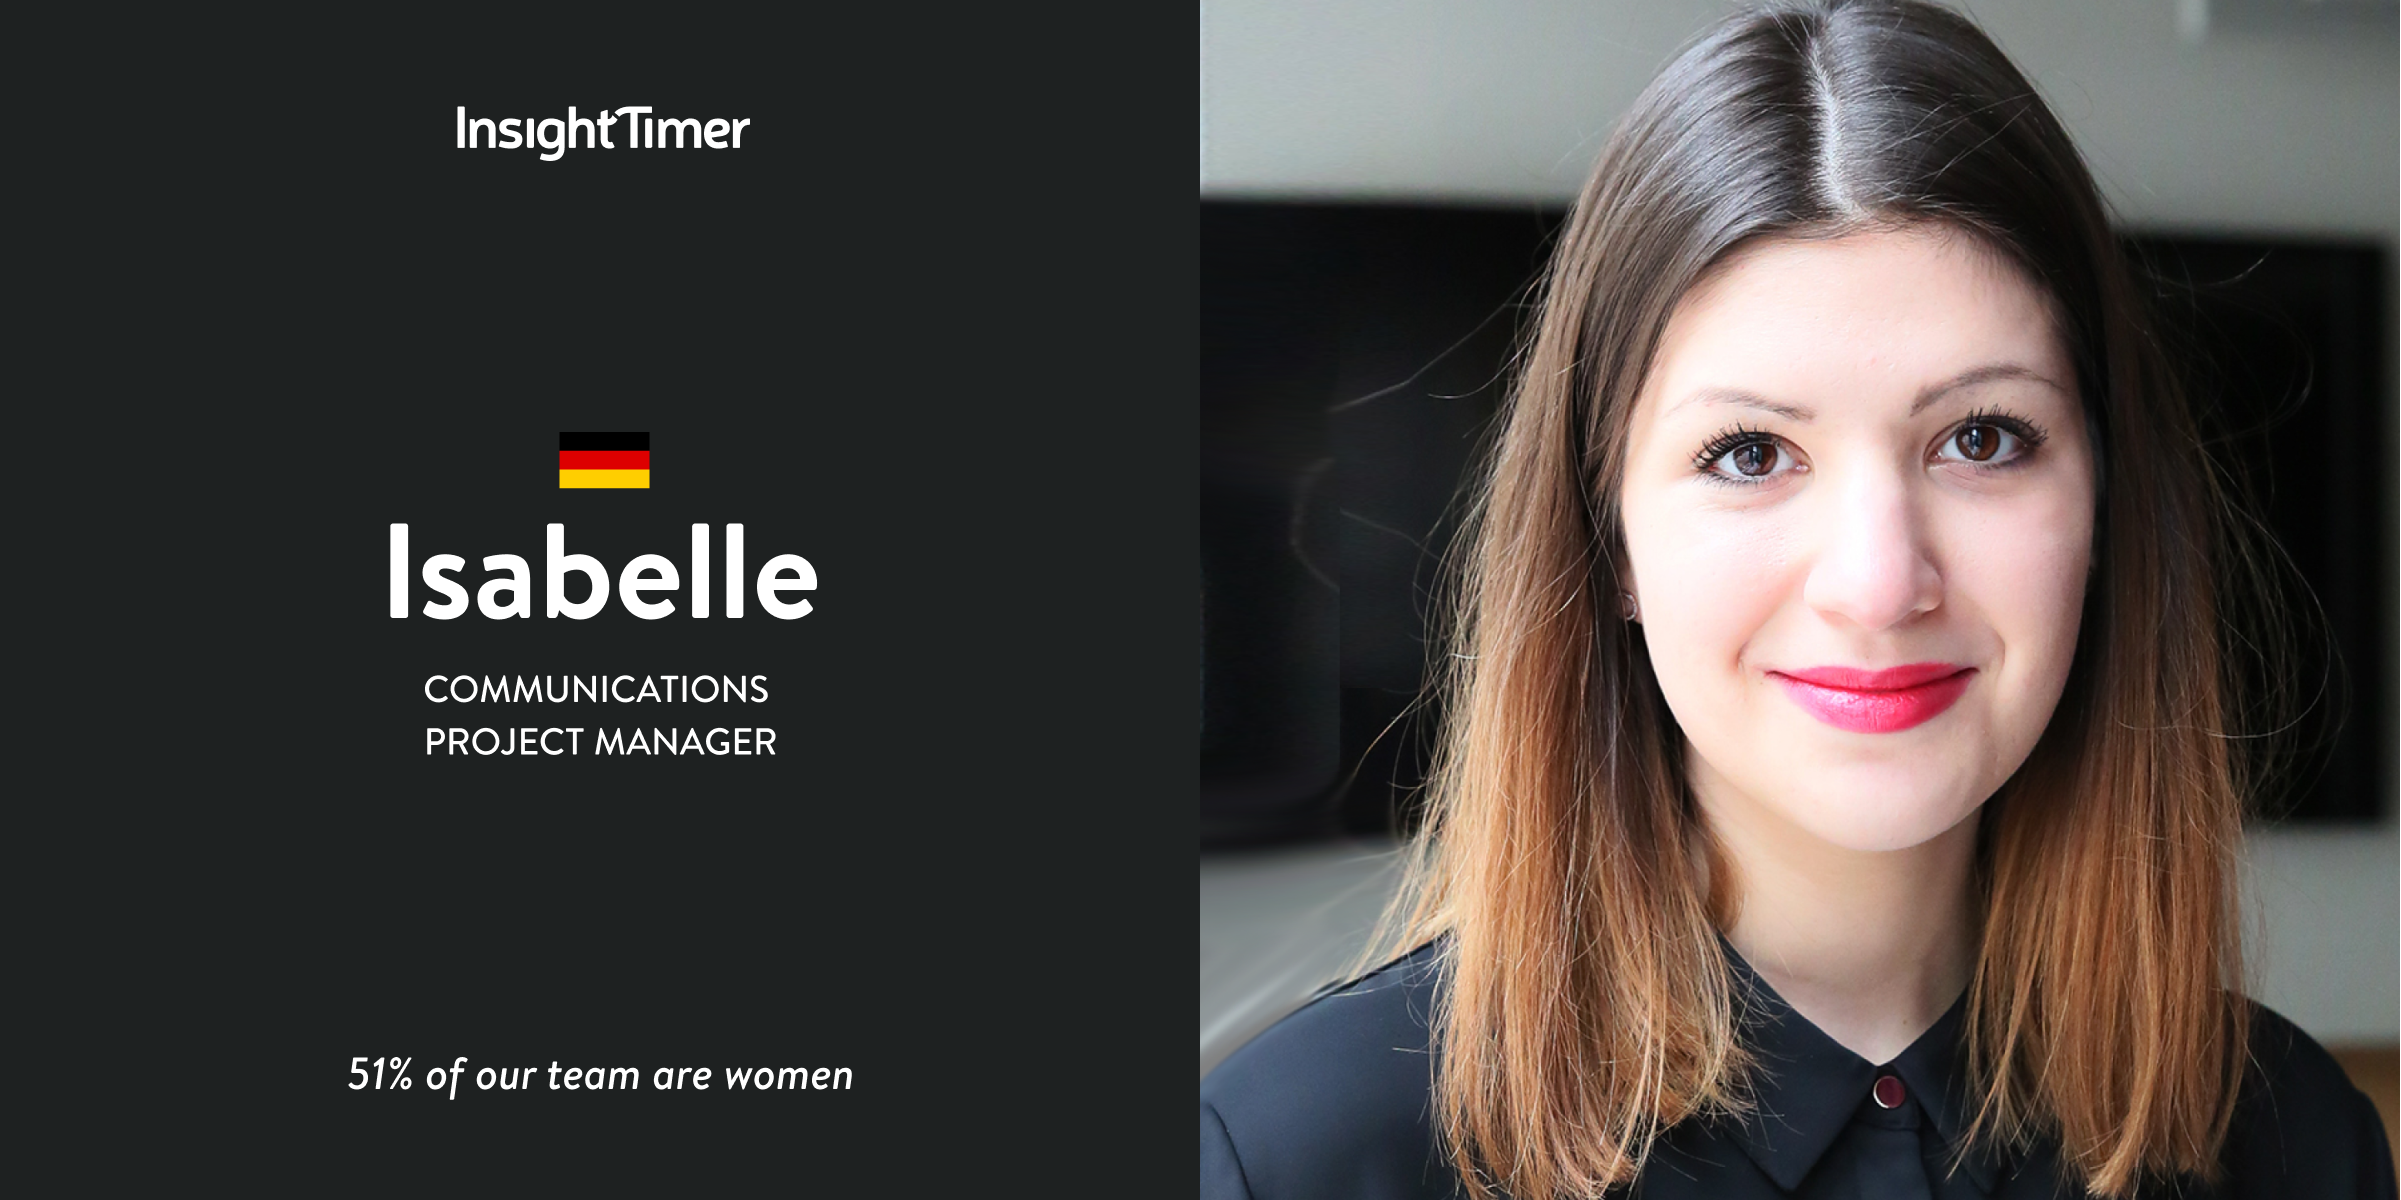 Meet Isabelle – Communications Project Manager